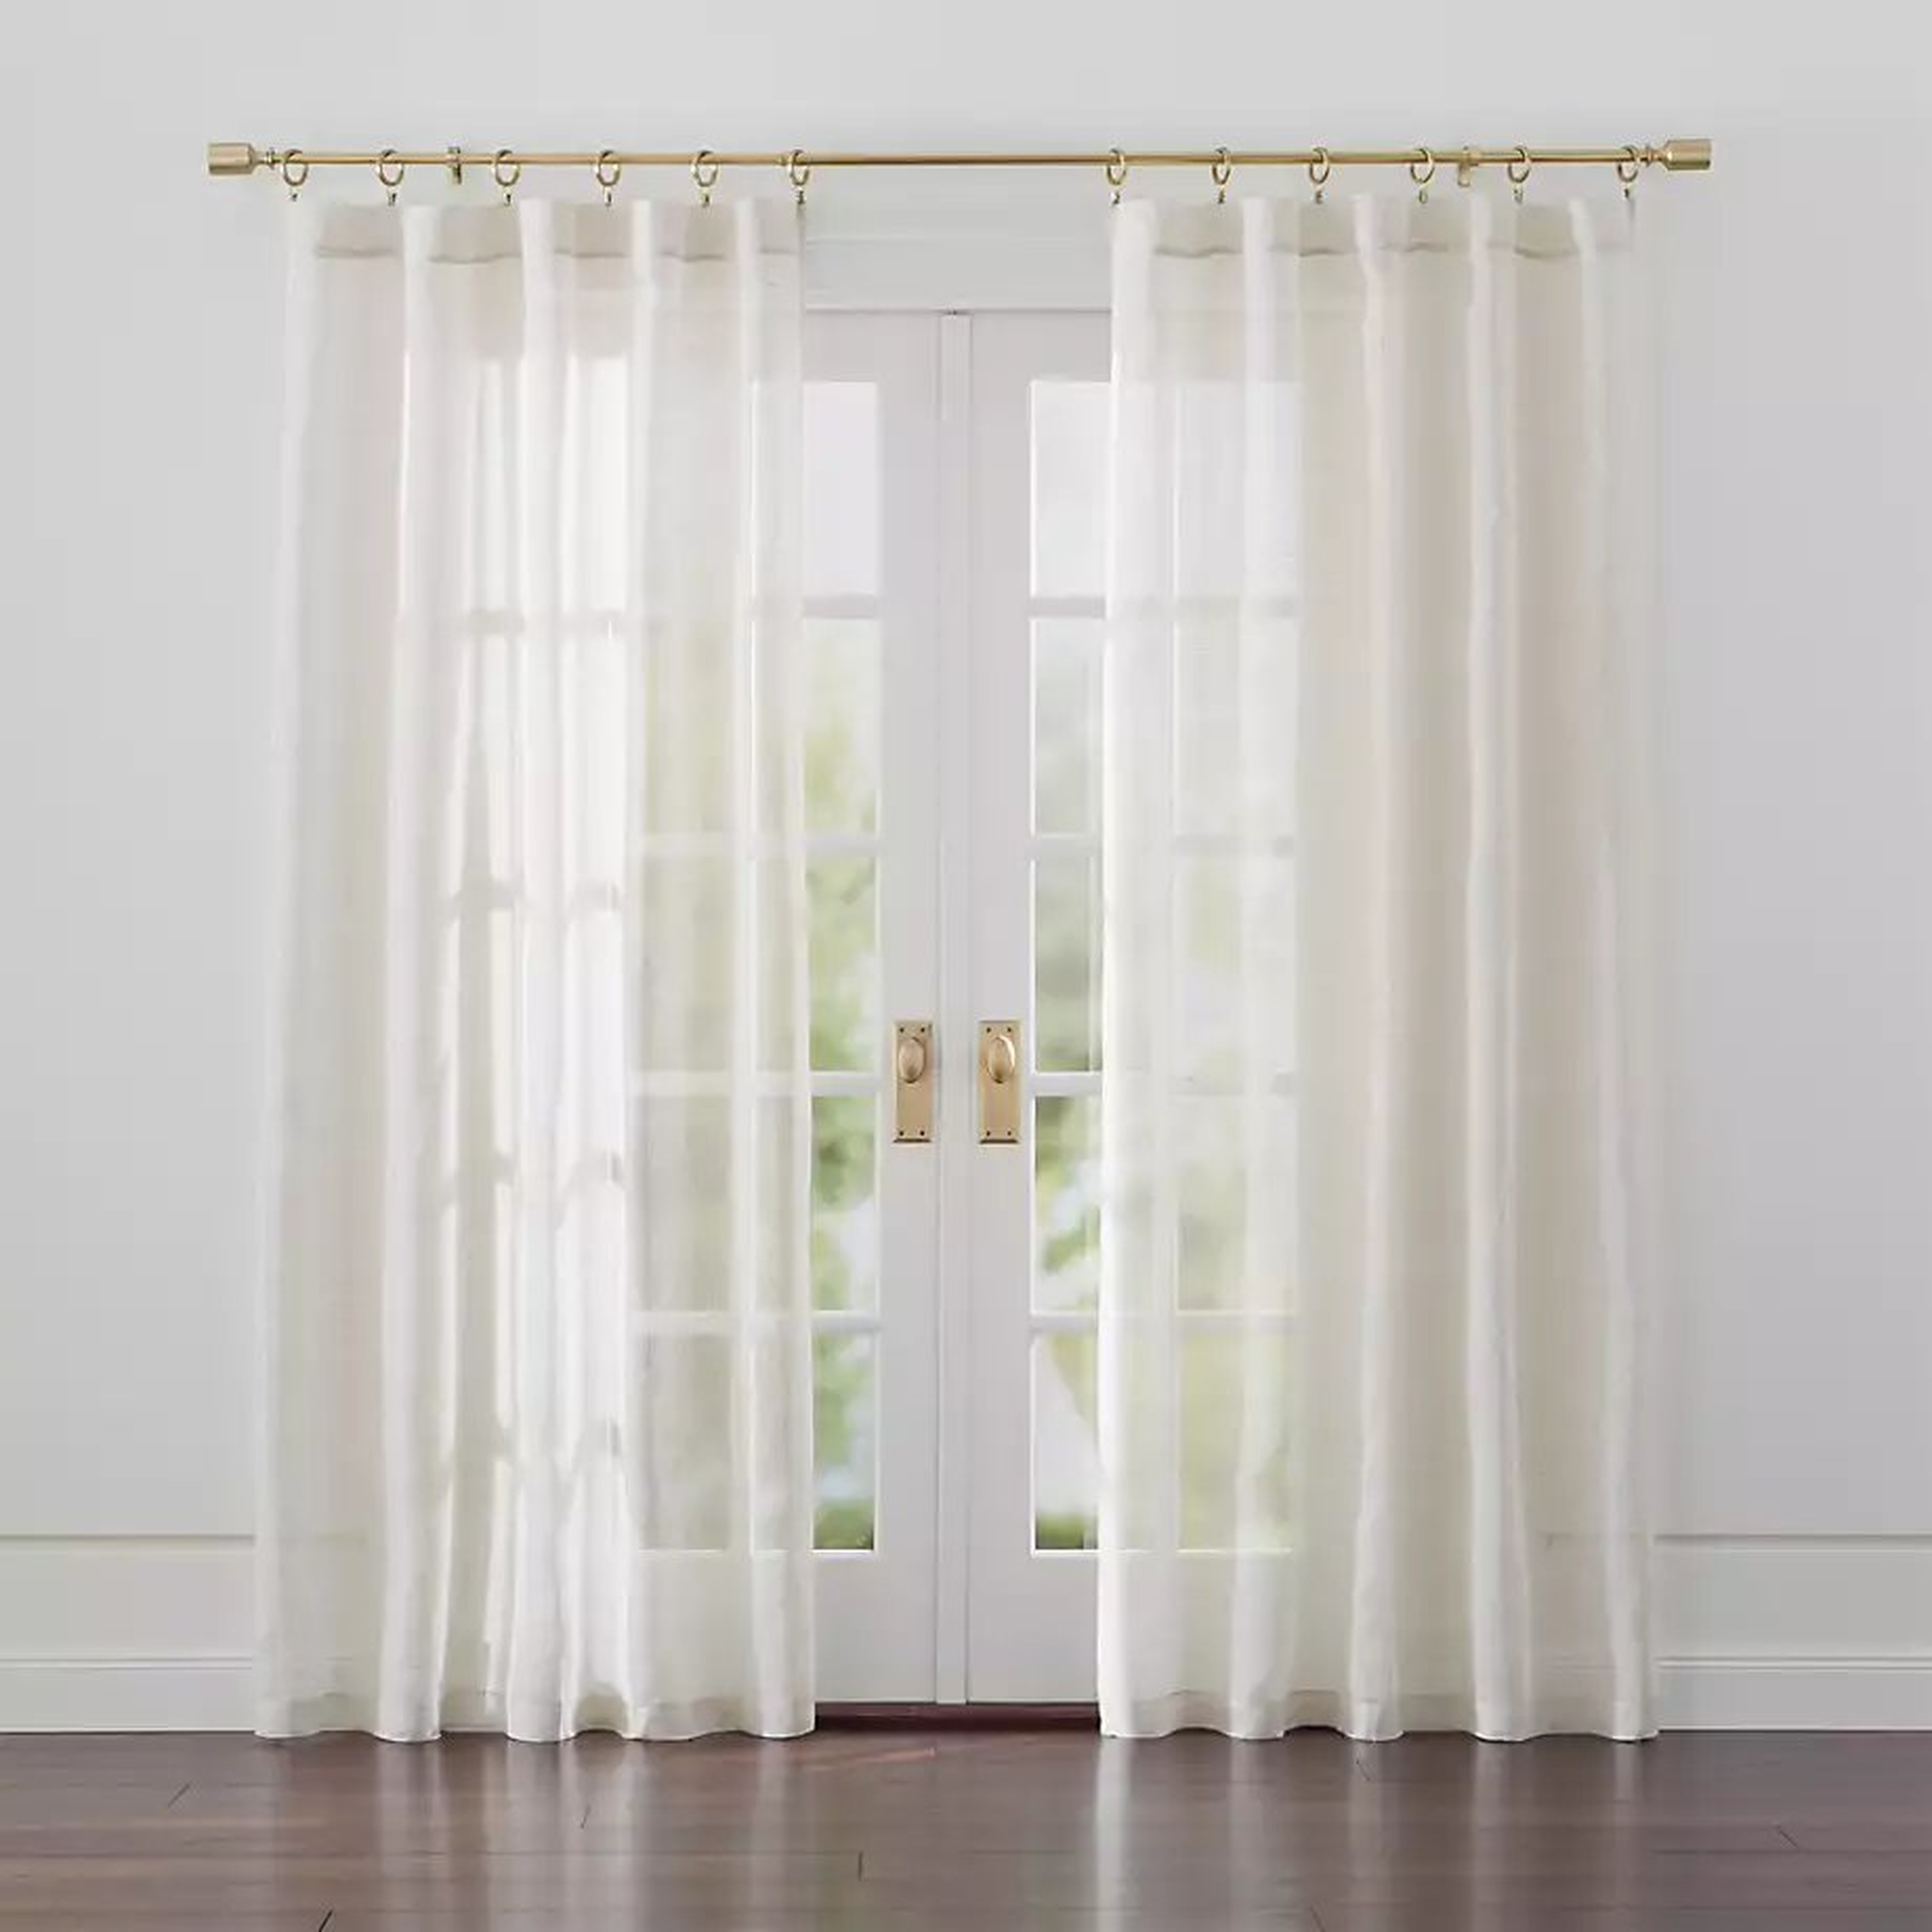 Linen Sheer 52"x120" Natural Curtain Panel - Crate and Barrel